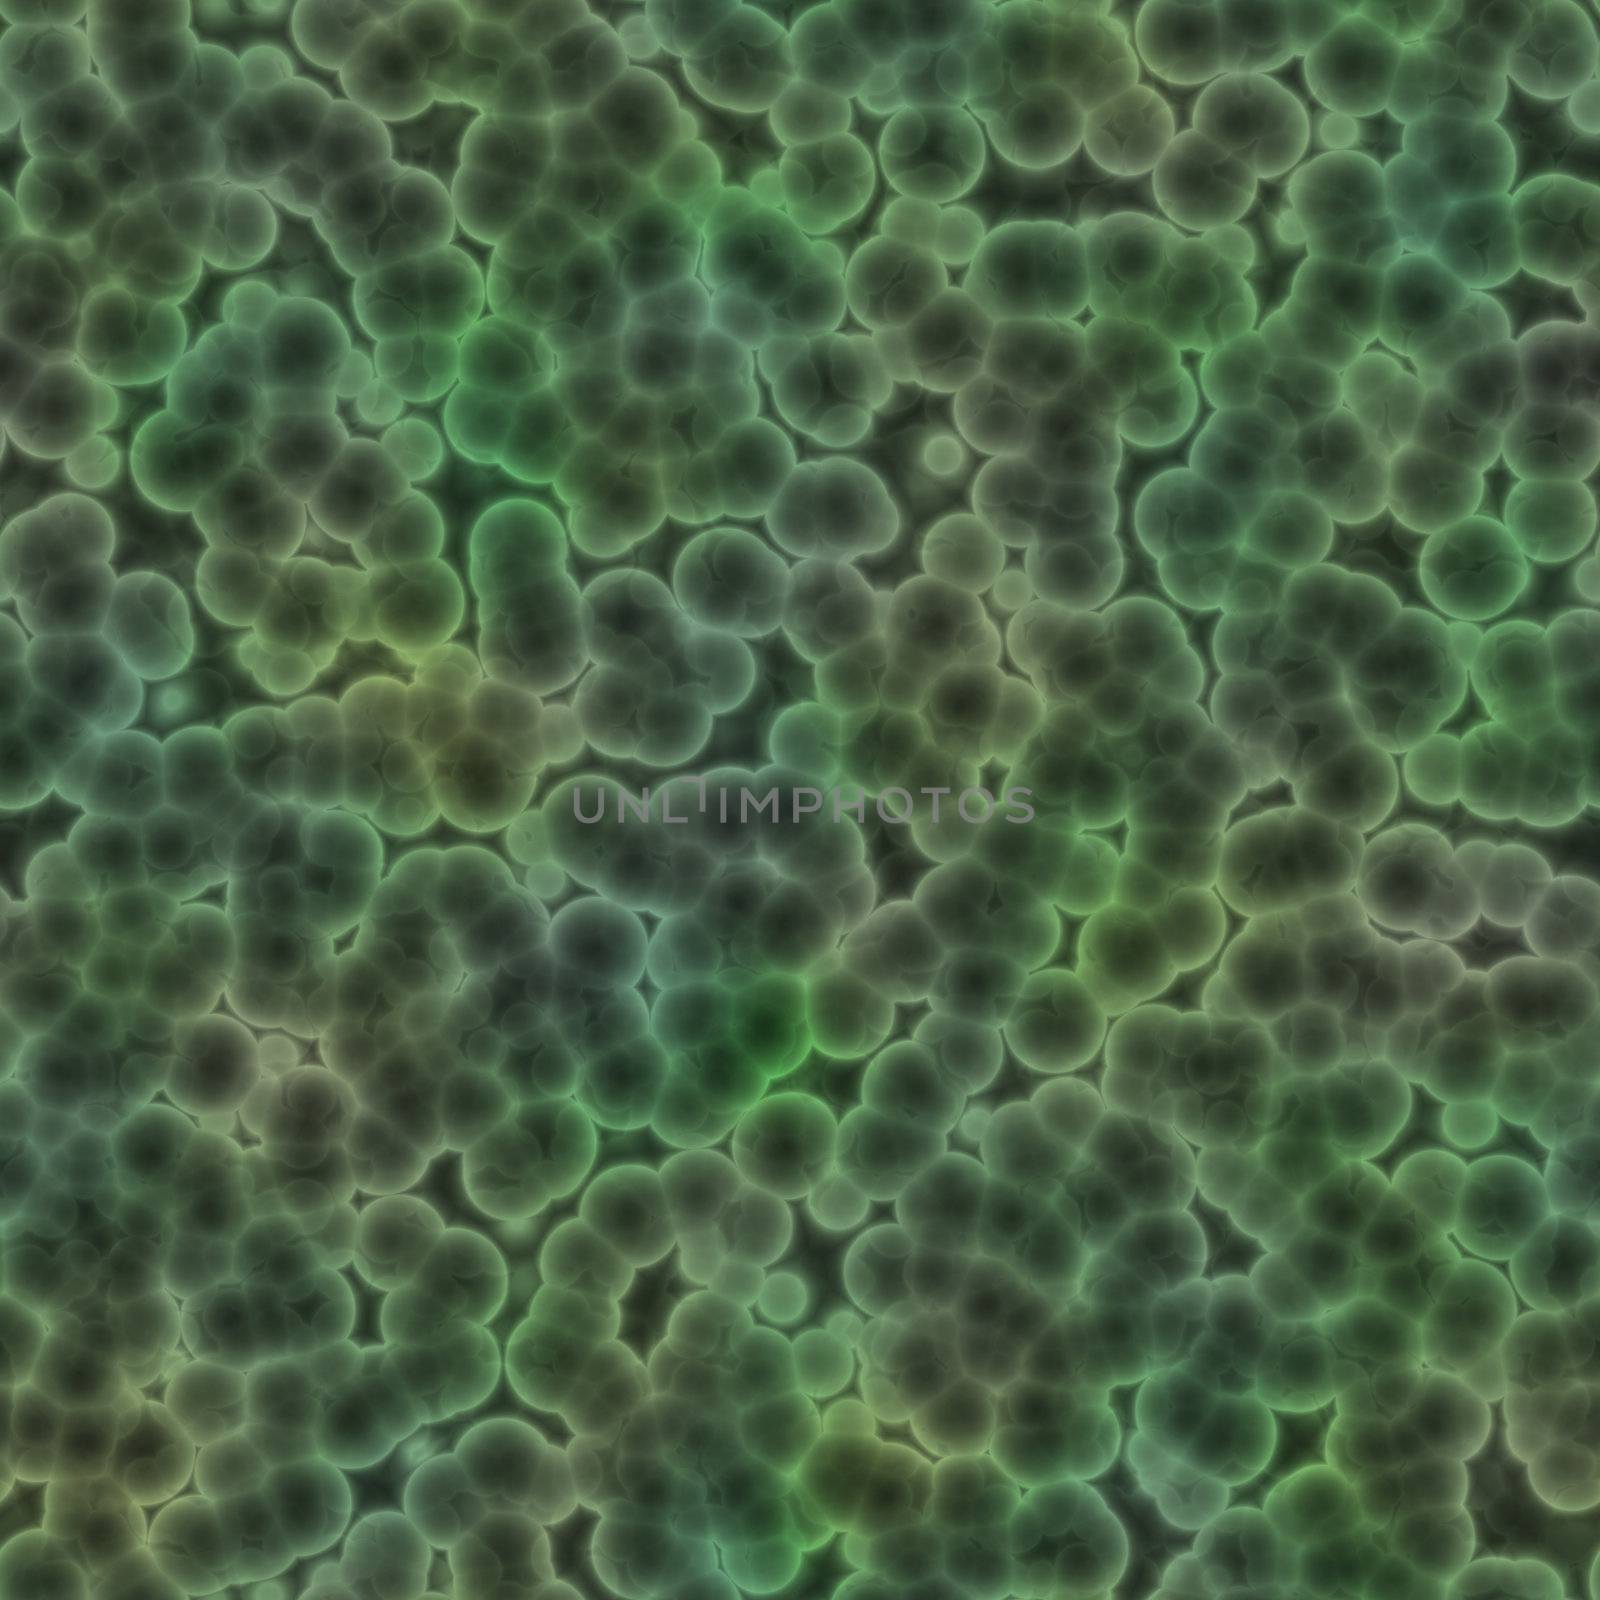 bacteria or cells by clearviewstock